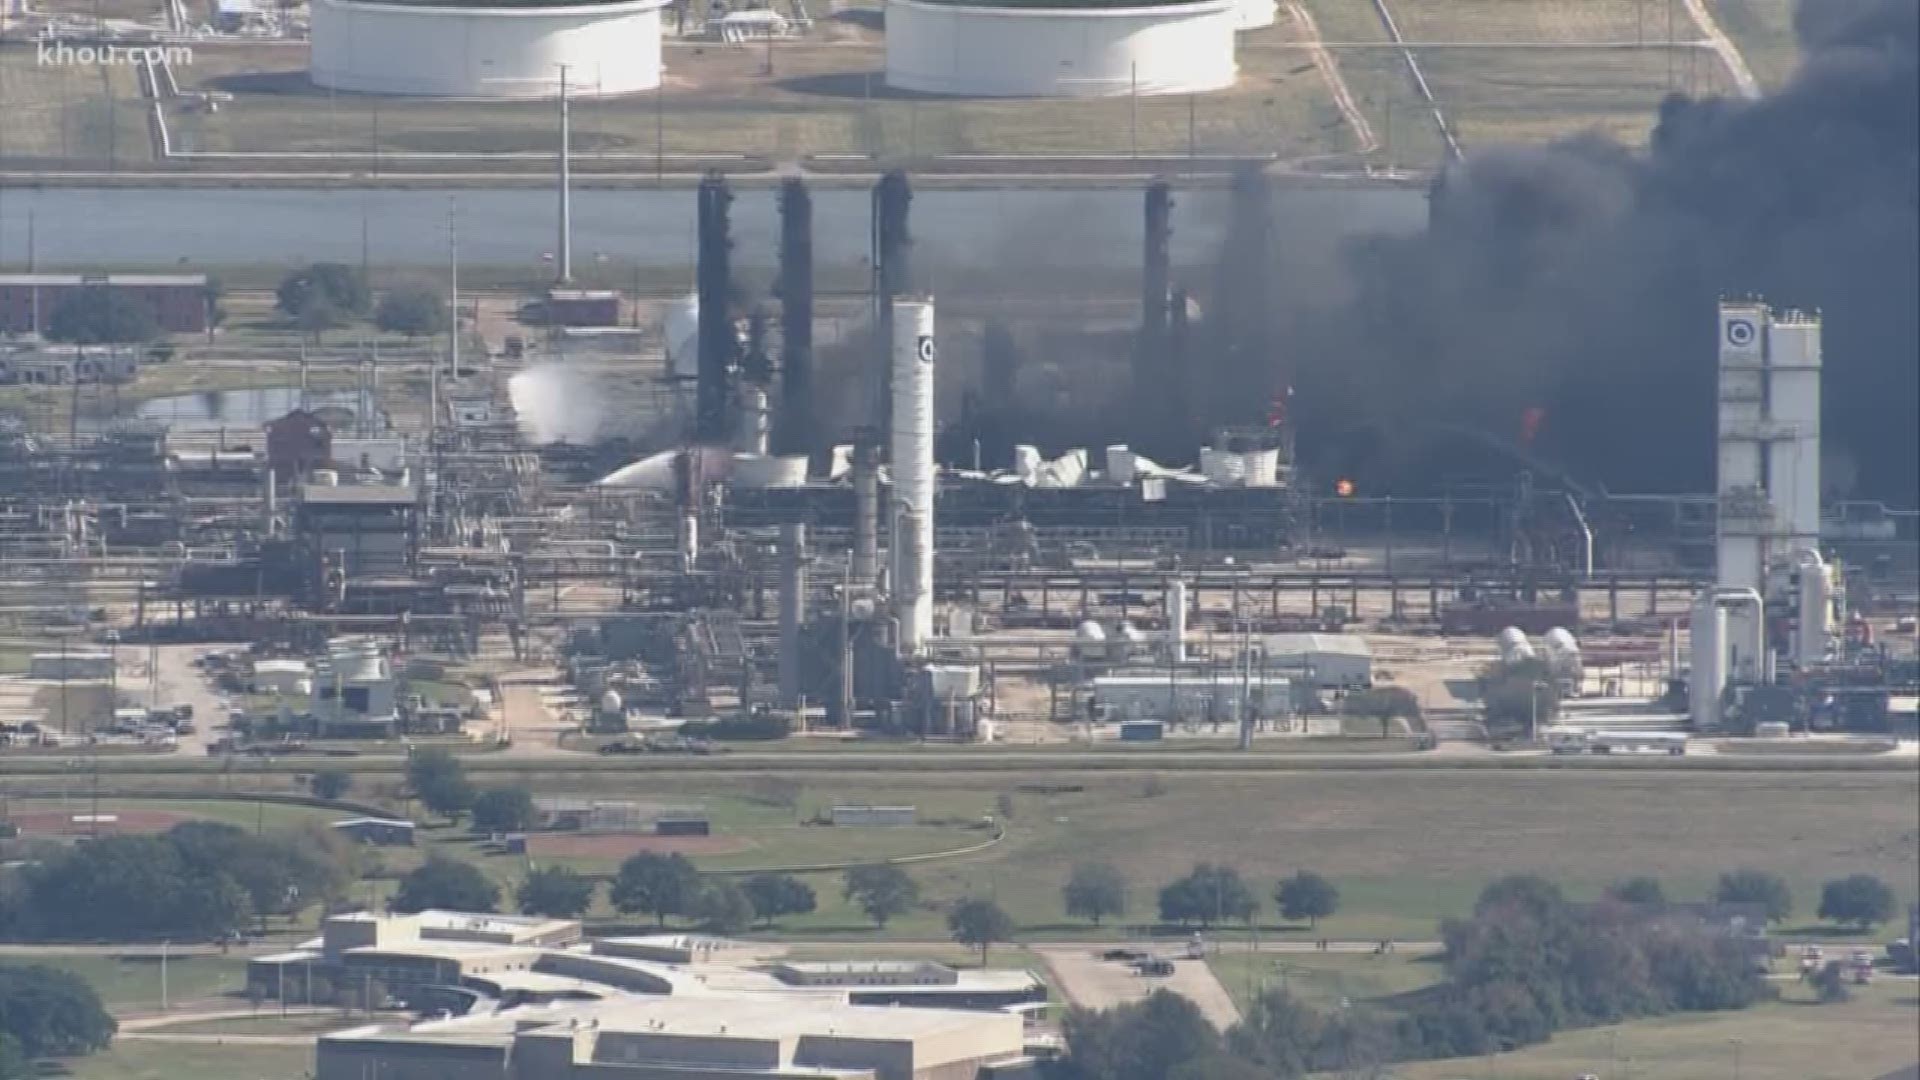 At least three people were hurt, but no one was killed when a massive explosion rocked the TPC Group Plant in Port Neches early Wednesday morning.